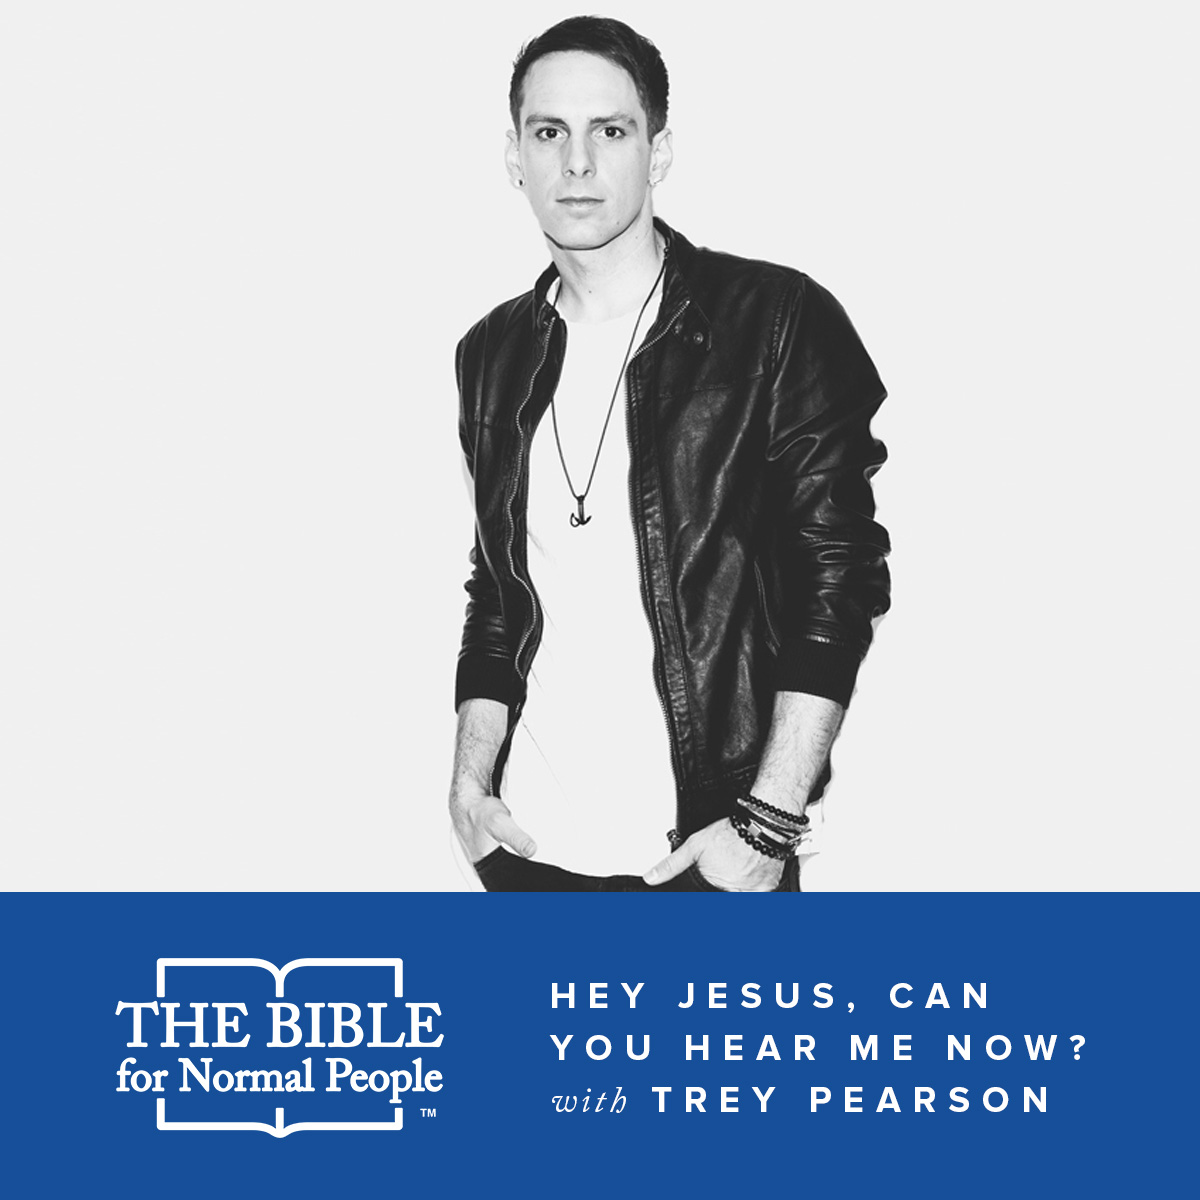 Interview with Trey Pearson: Hey Jesus, Can You Hear Me Now?